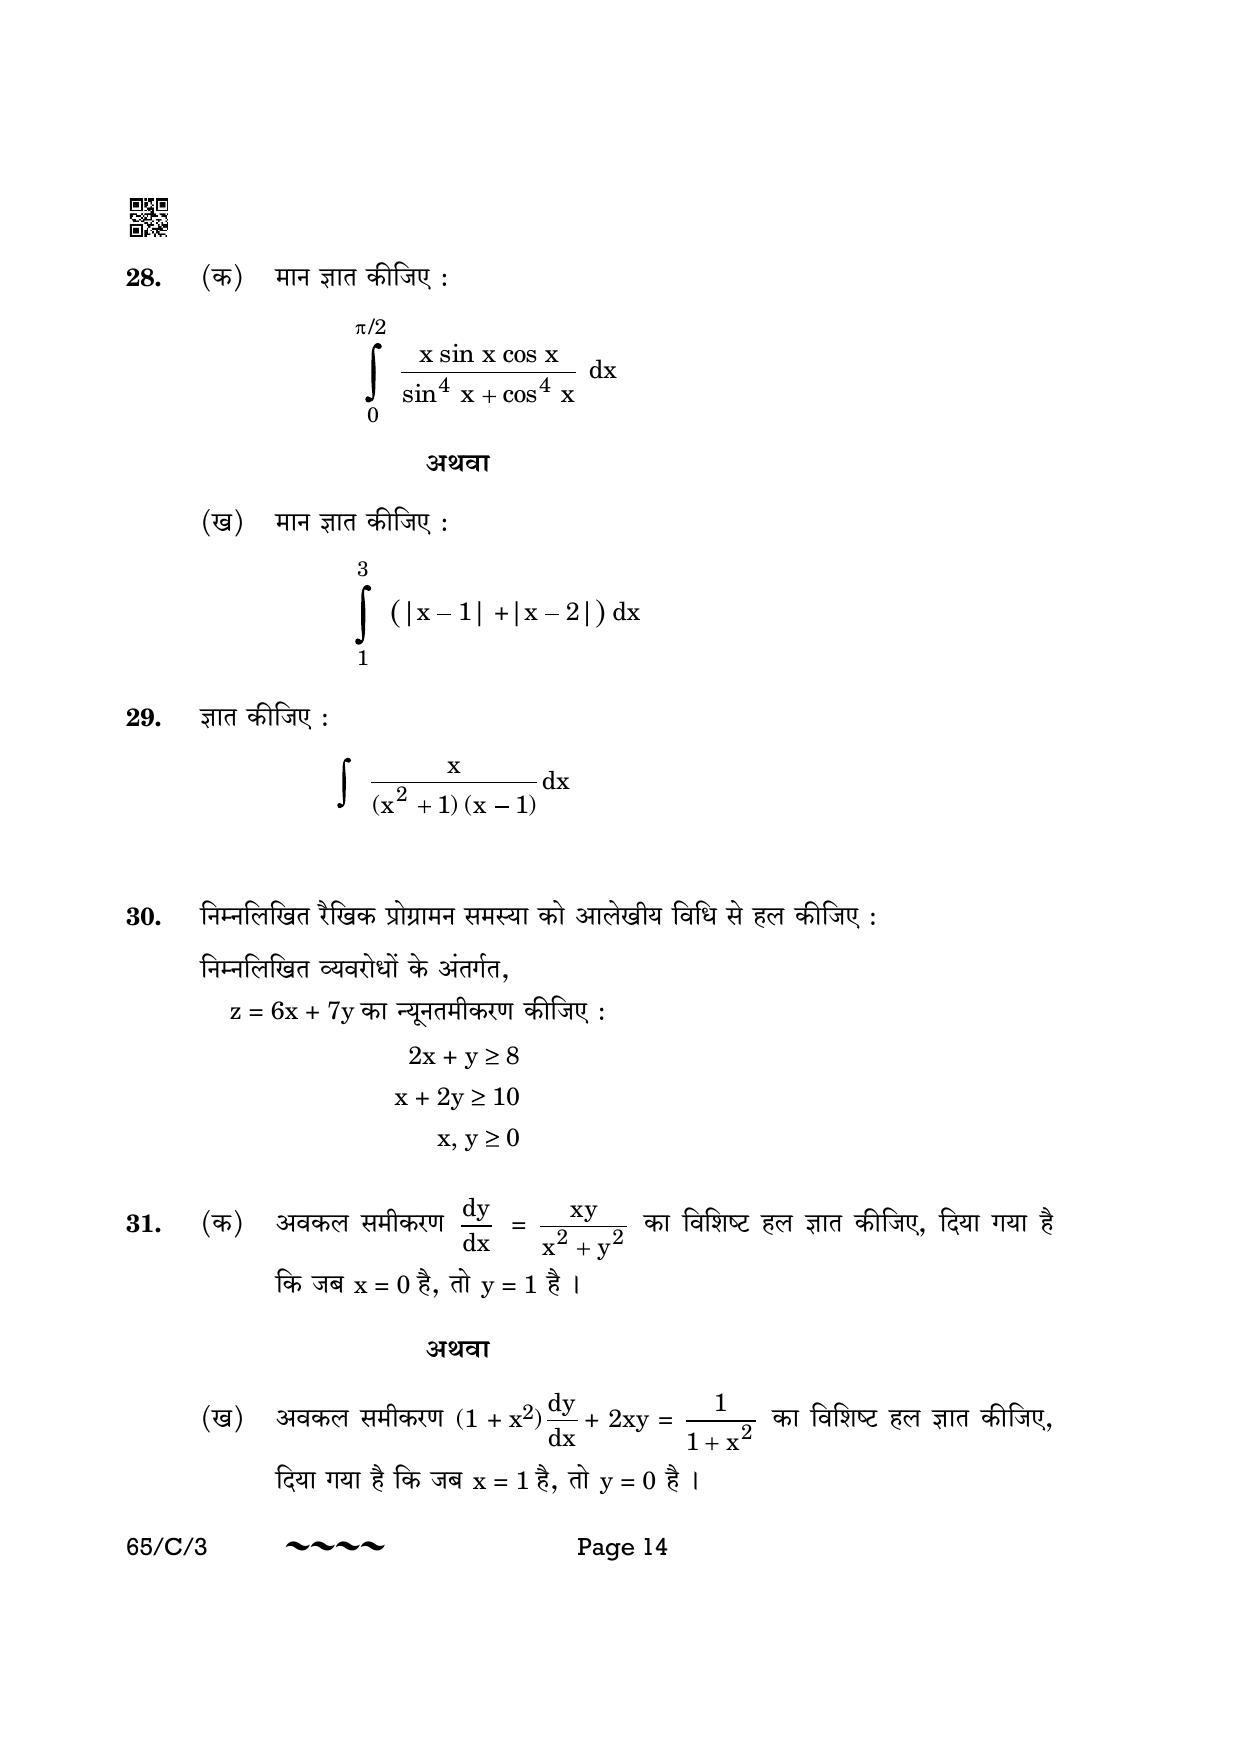 CBSE Class 12 65-3- Mathematics 2023 (Compartment) Question Paper - Page 14